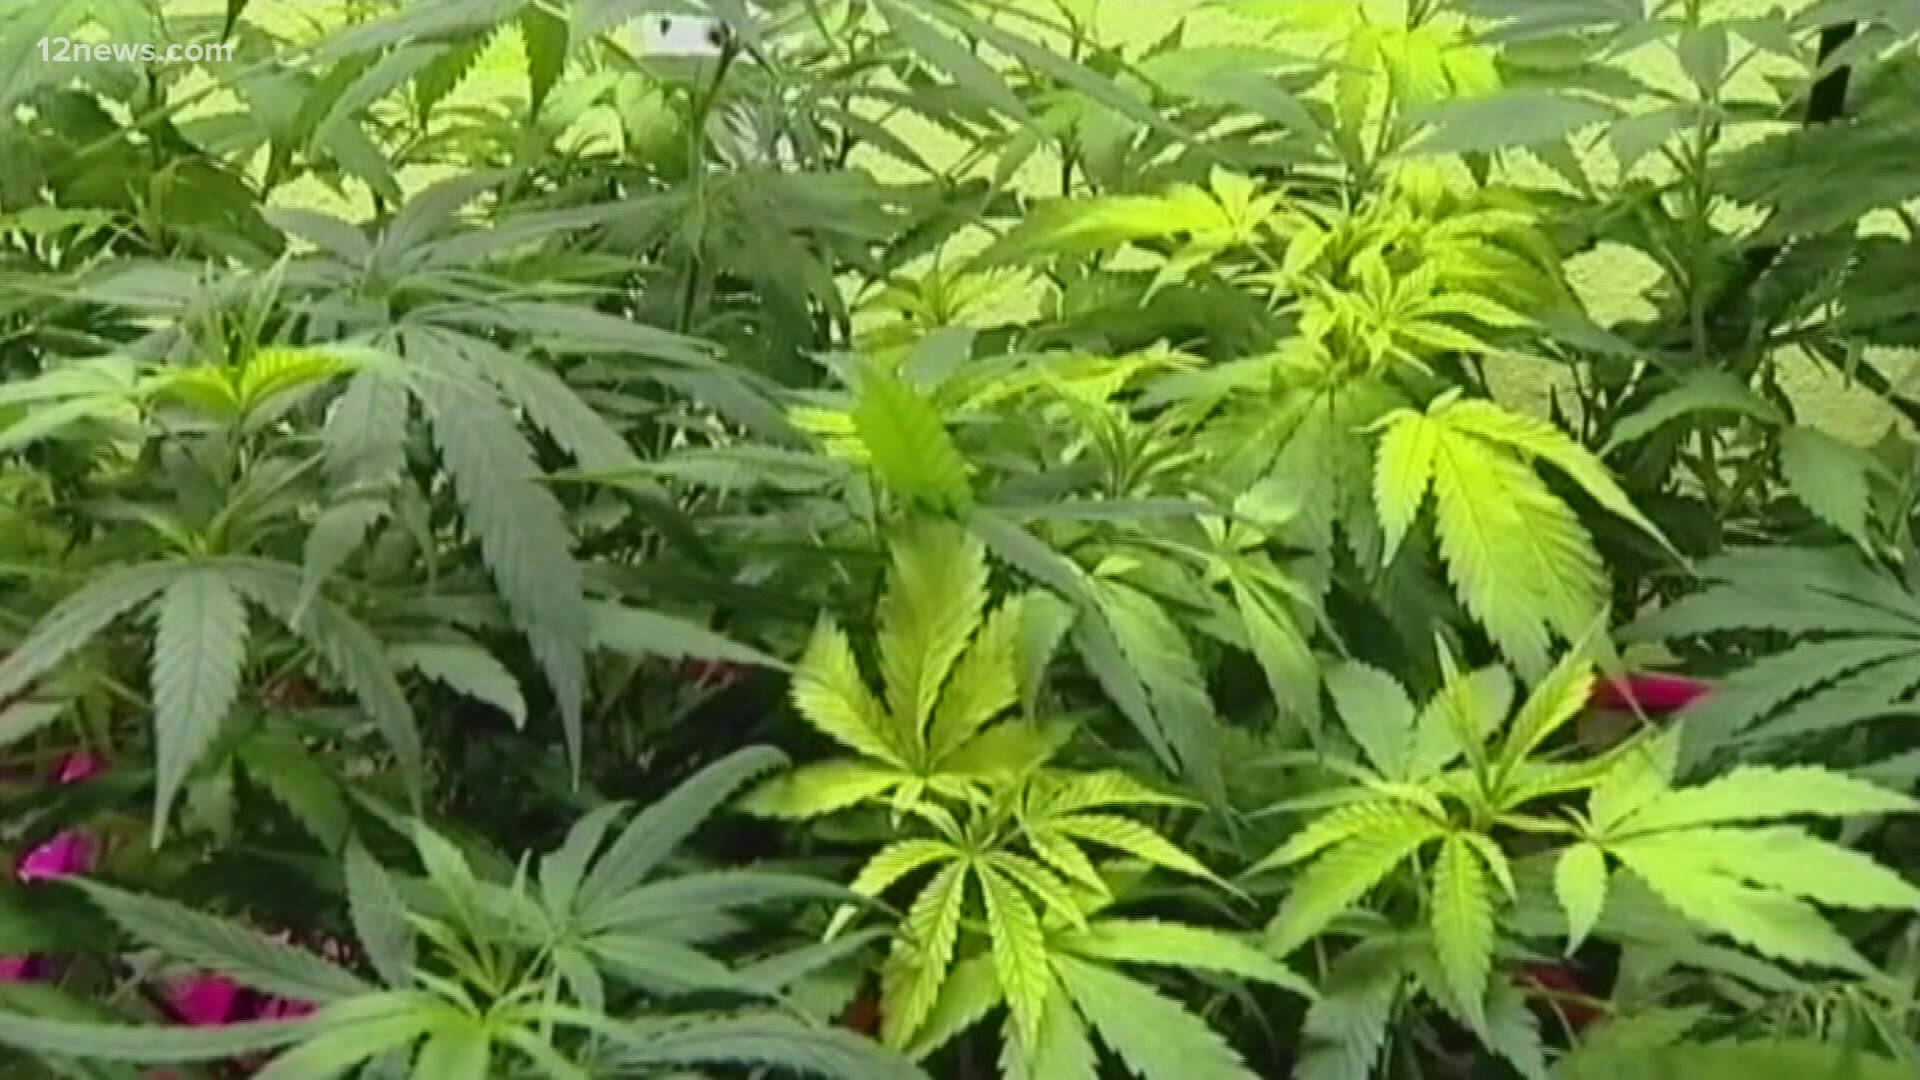 Marijuana use for those 21 and older is now the law of the land in Arizona. But, there's still no legal way to get it yet. Here's what's next for recreational pot.